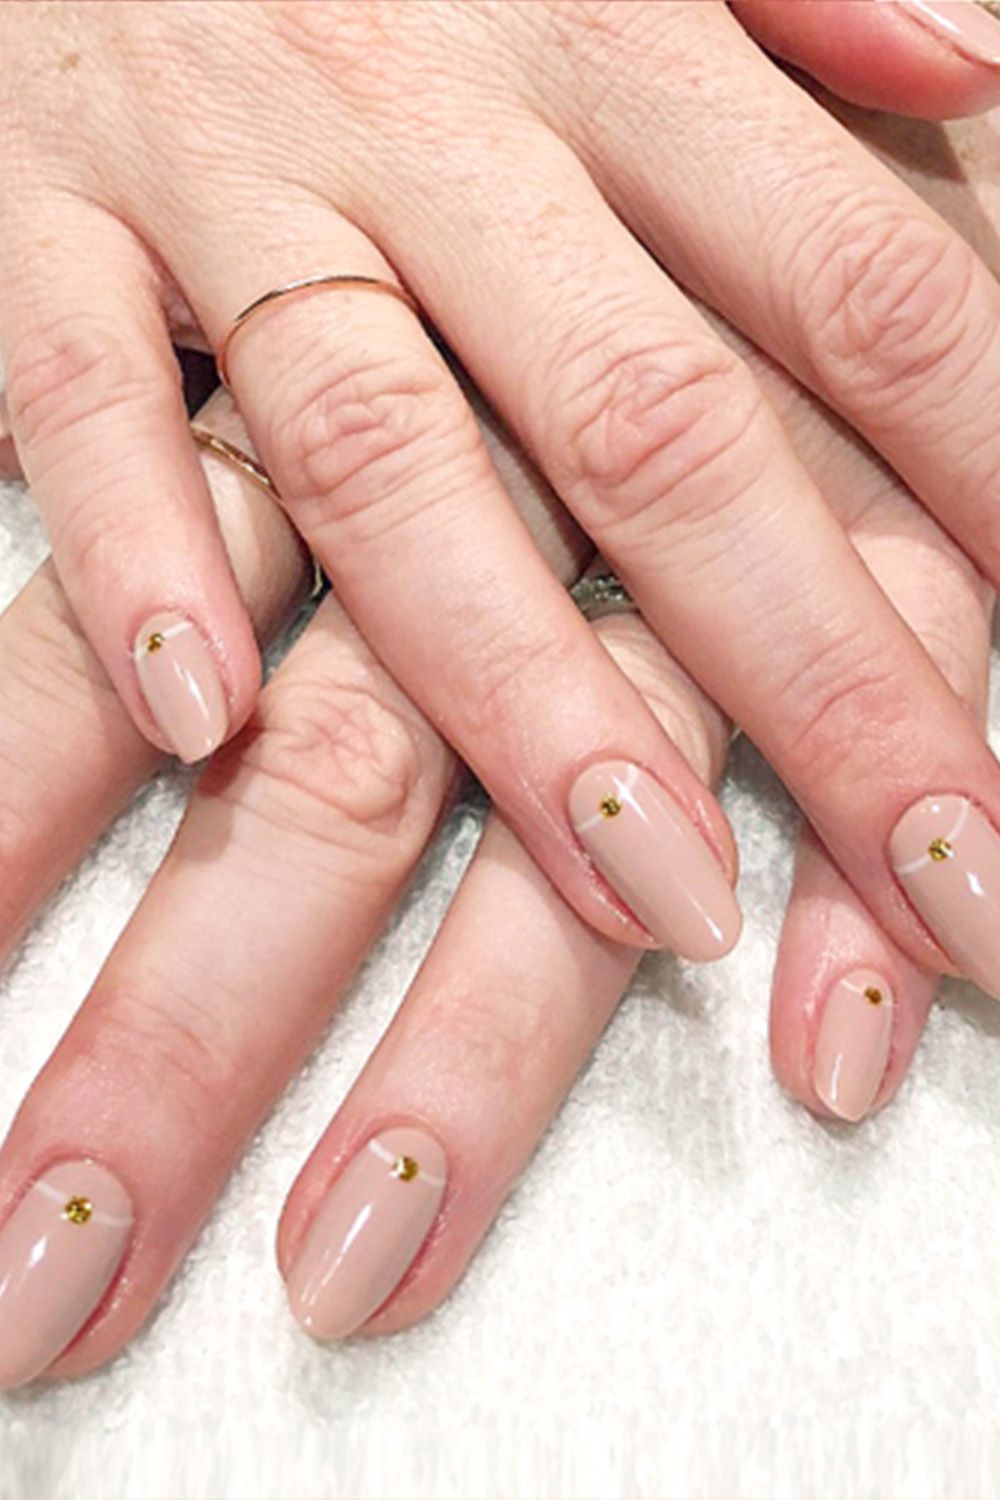 16 Nude Color Nail Designs To Try - Ideas For Nude Nail Art